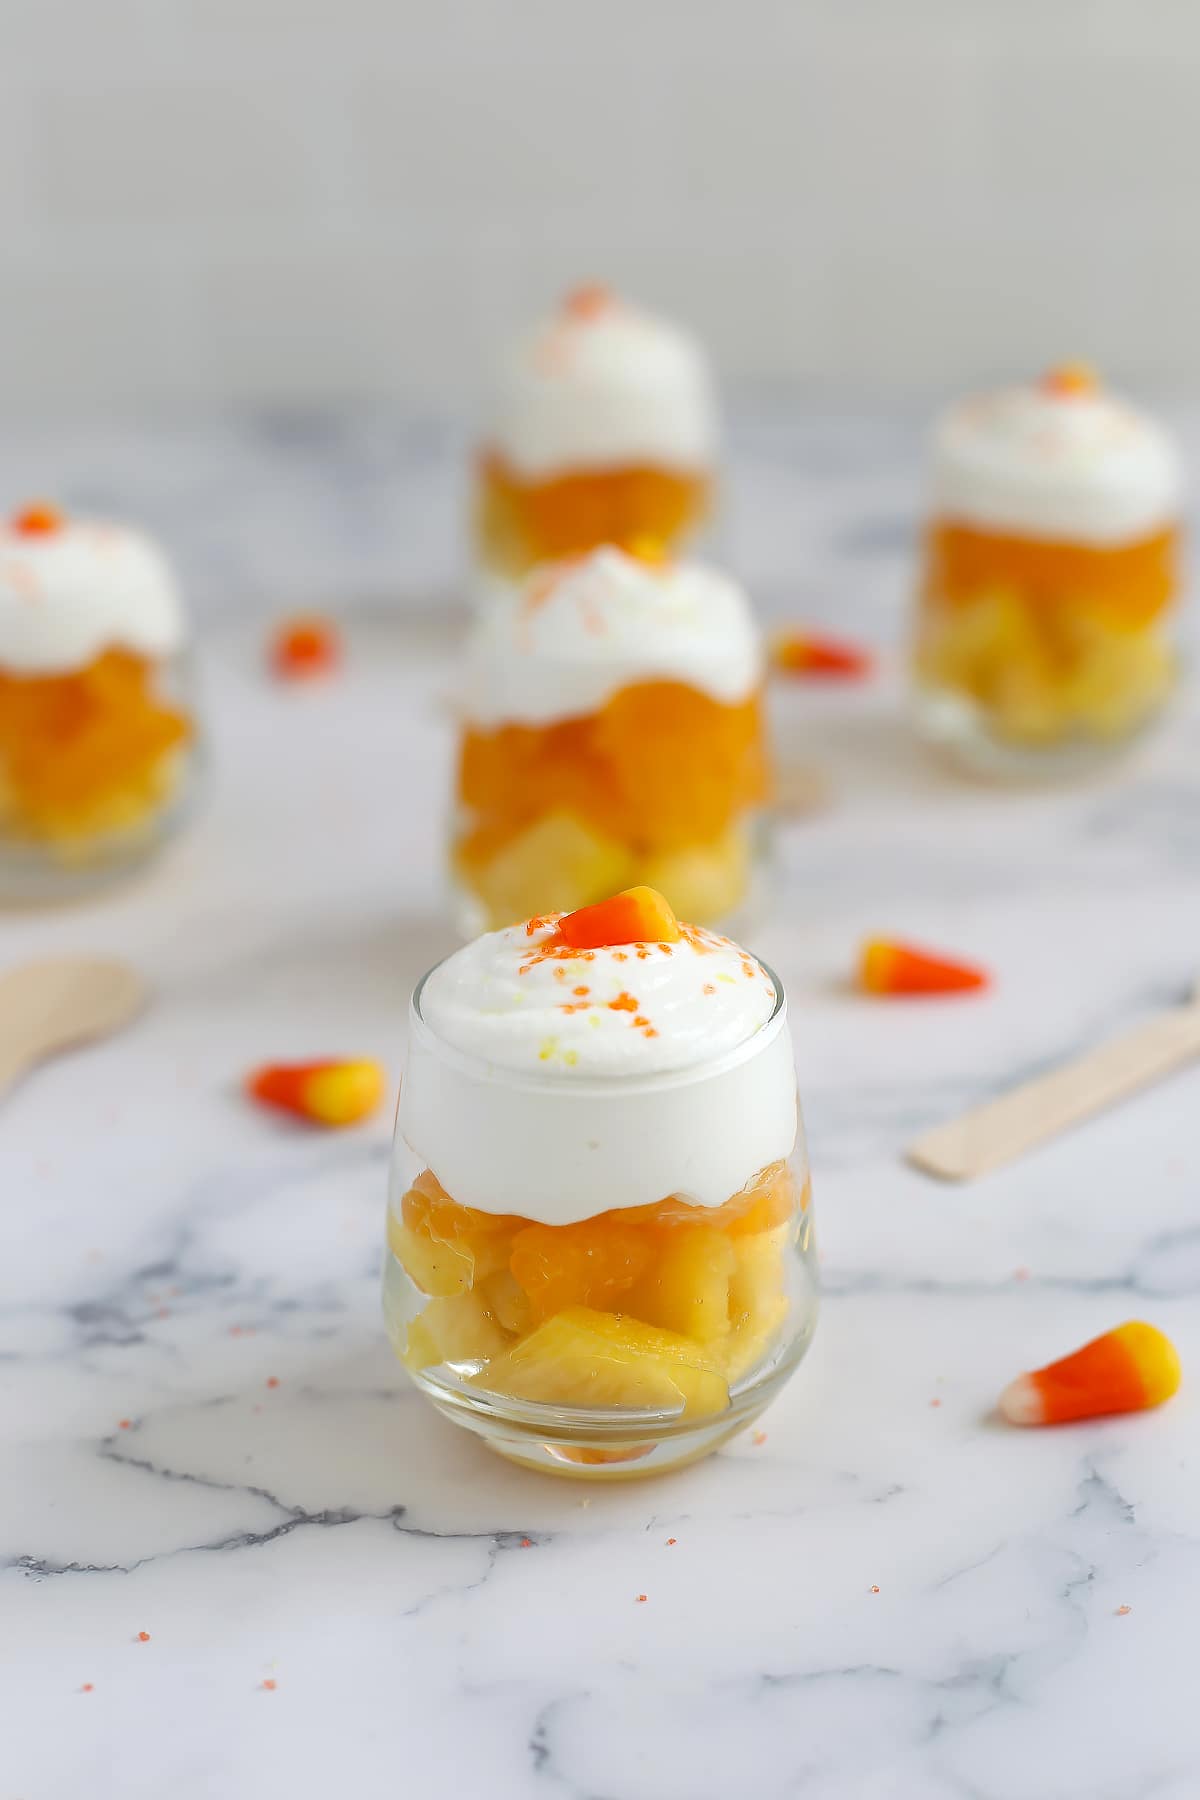 Healthy halloween fruit parfaits made with pineapple, oranges, and cottage cheese.